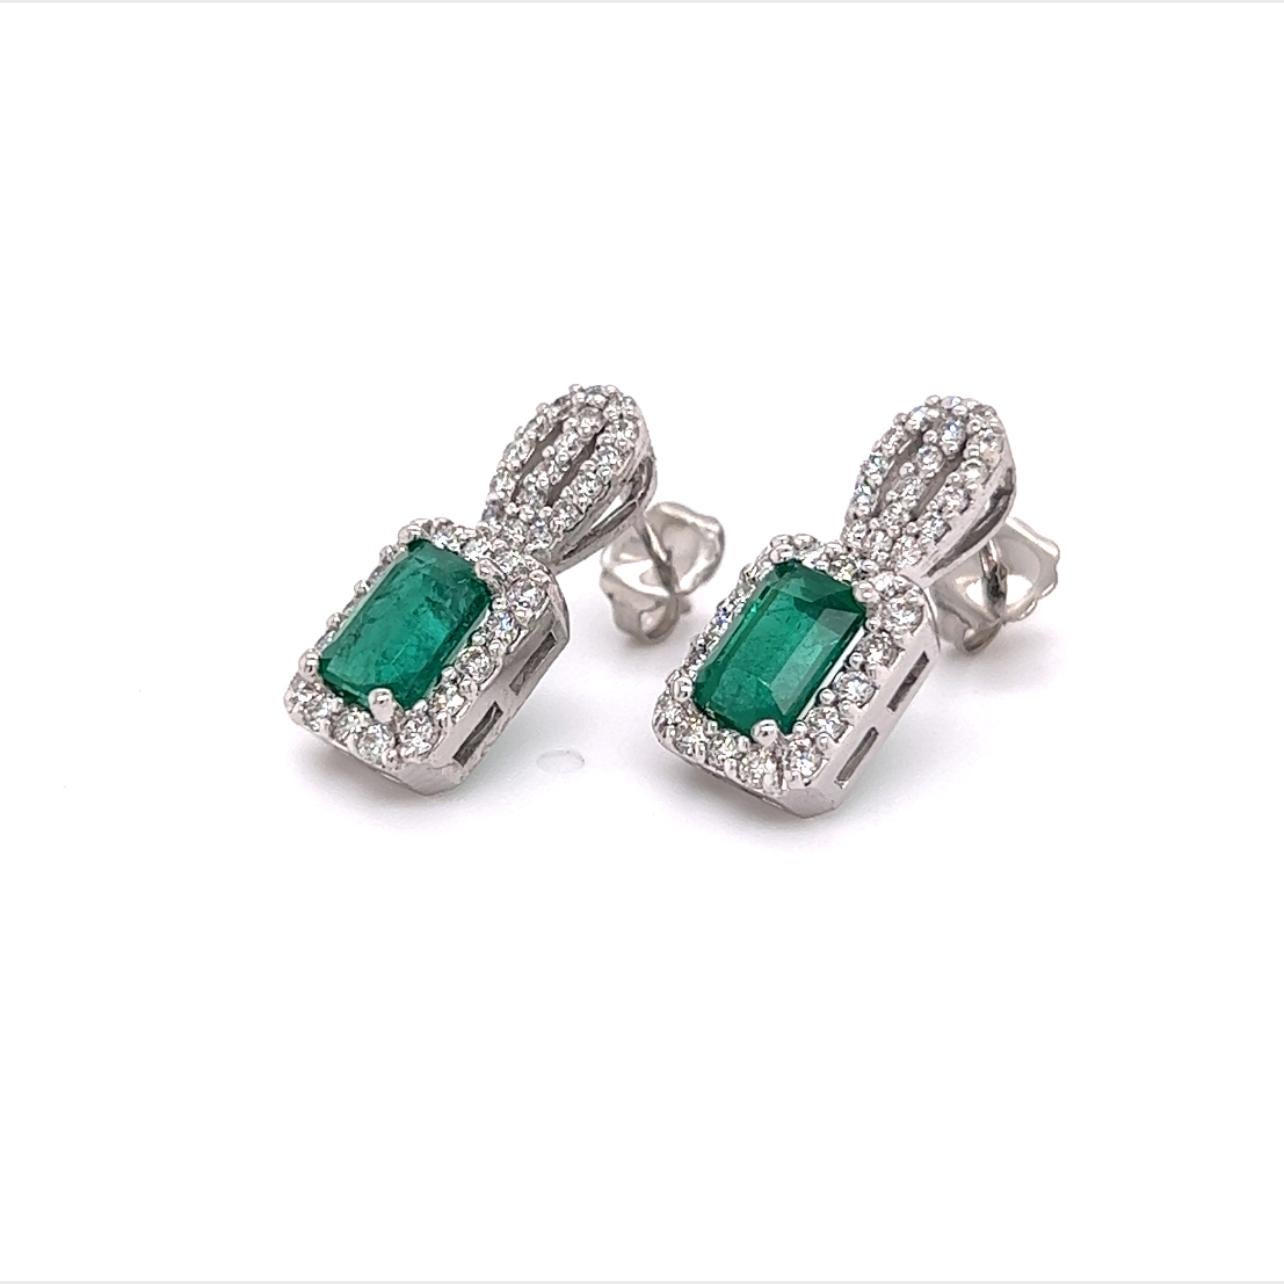 Natural Emerald Diamond Stud Earrings 14k Gold 2.74 TCW Certified For Sale 5